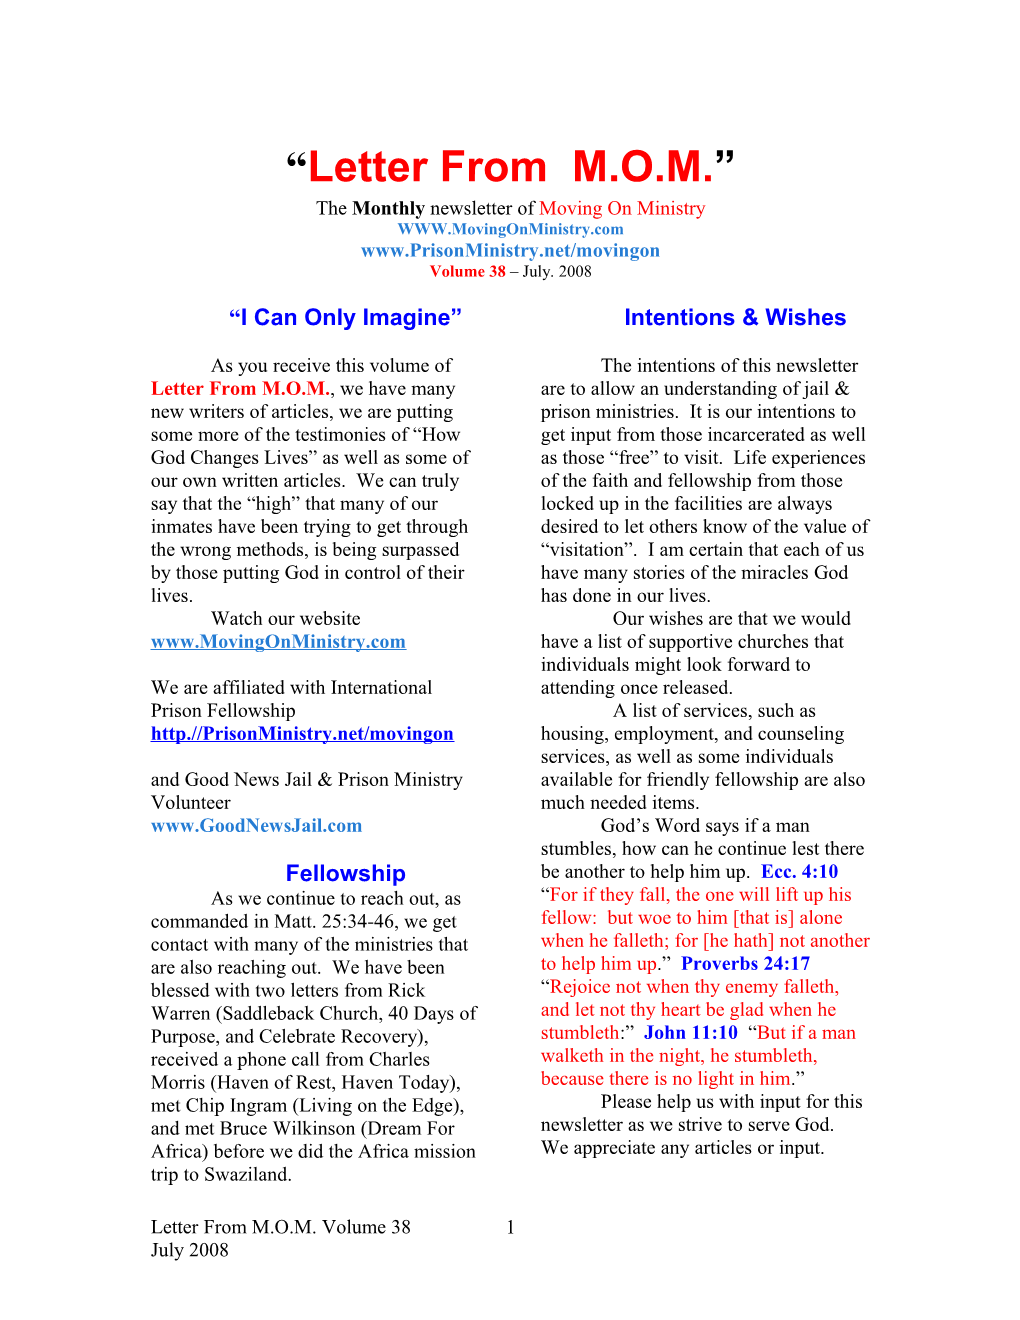 Letter from M.O.M s1